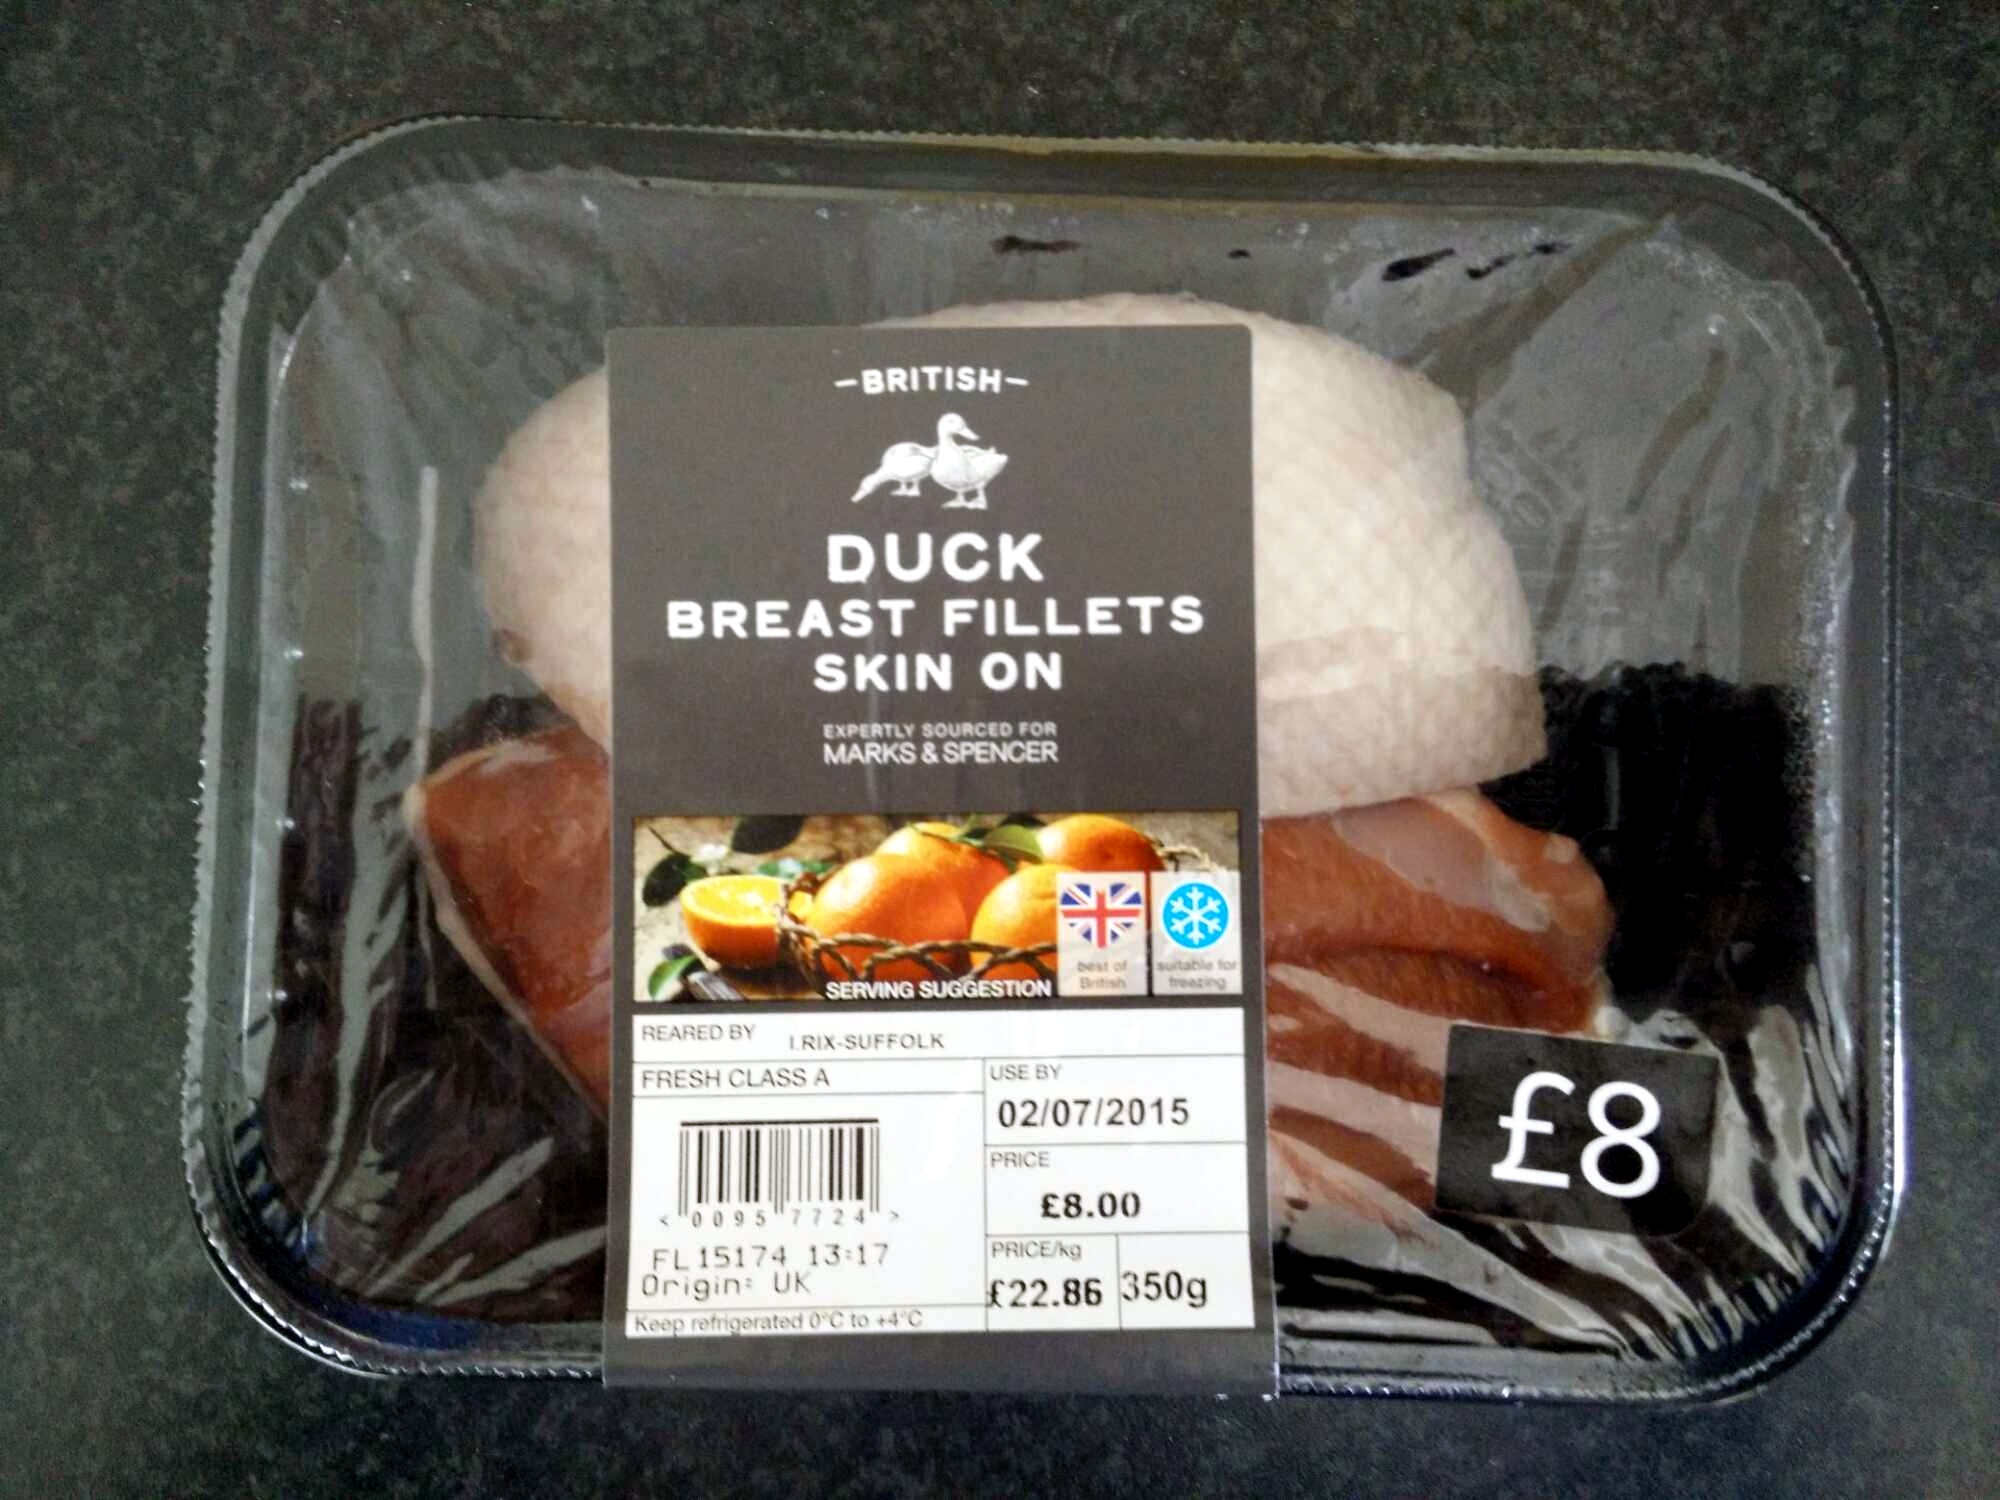 Duck breast fillets skin on - Product